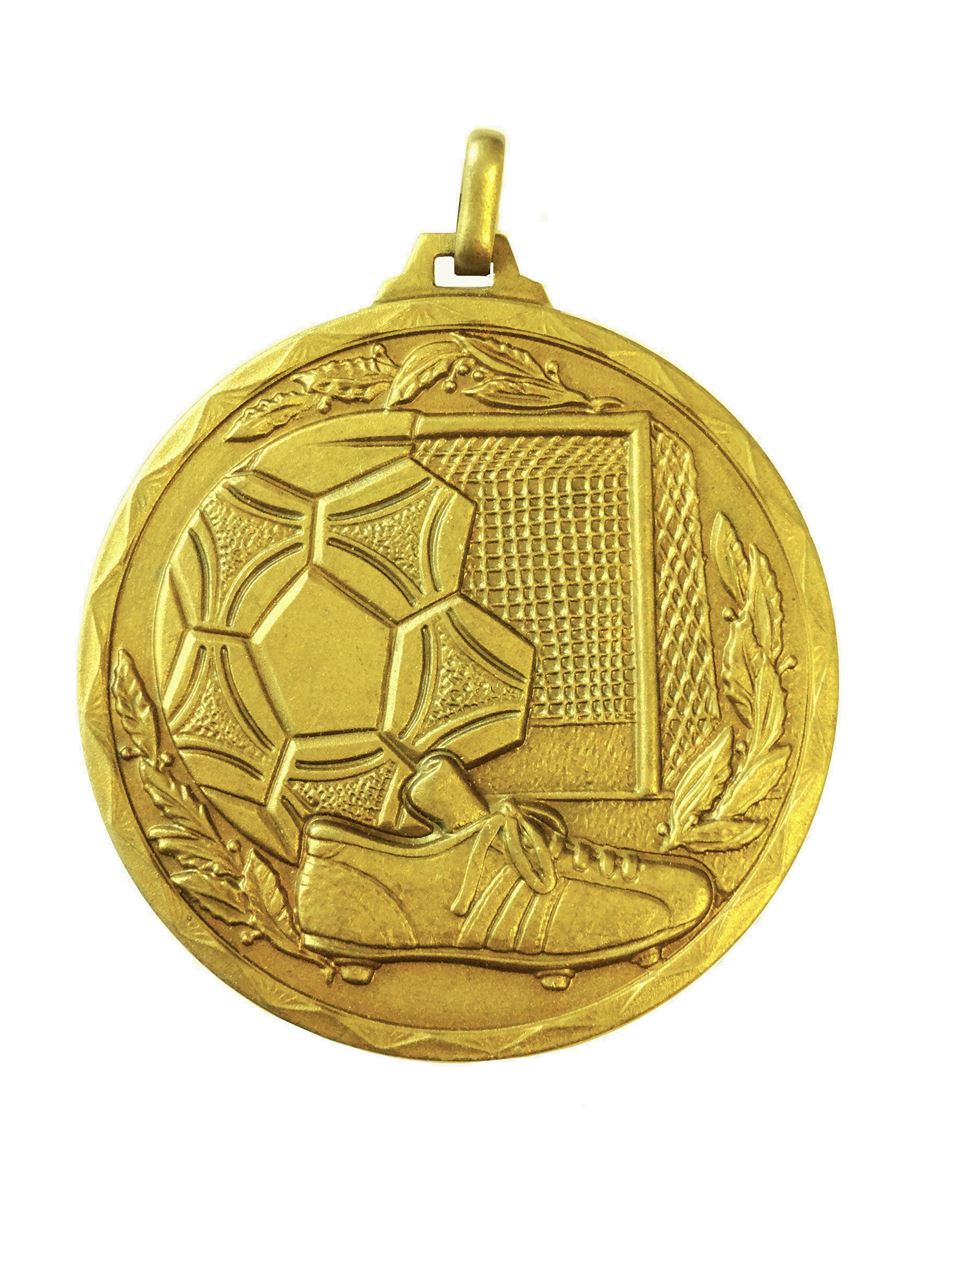 Gold Economy Football Boot Medal (size: 52mm) - 174E